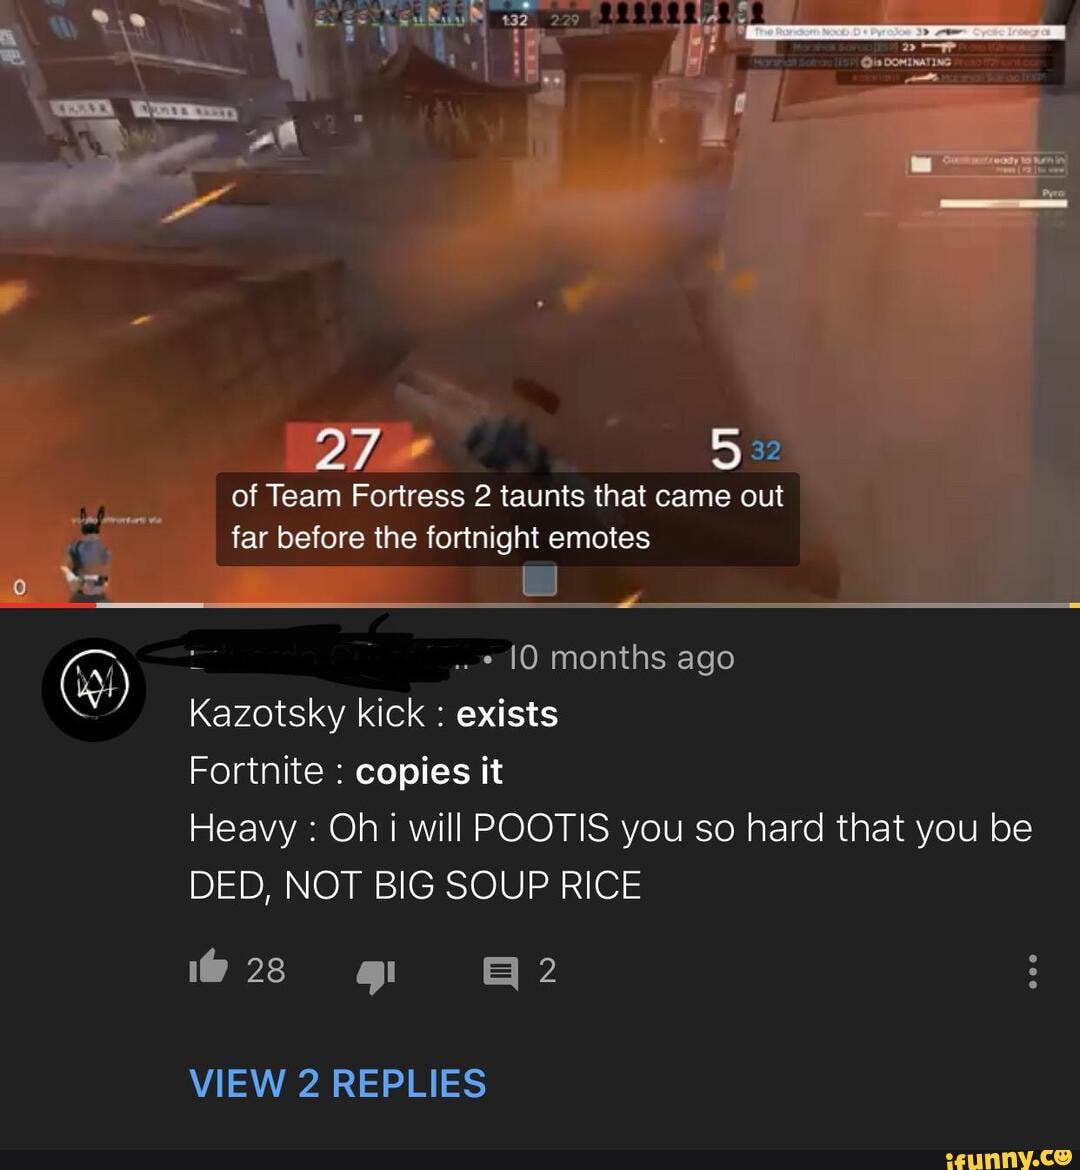 ded not big soup rice